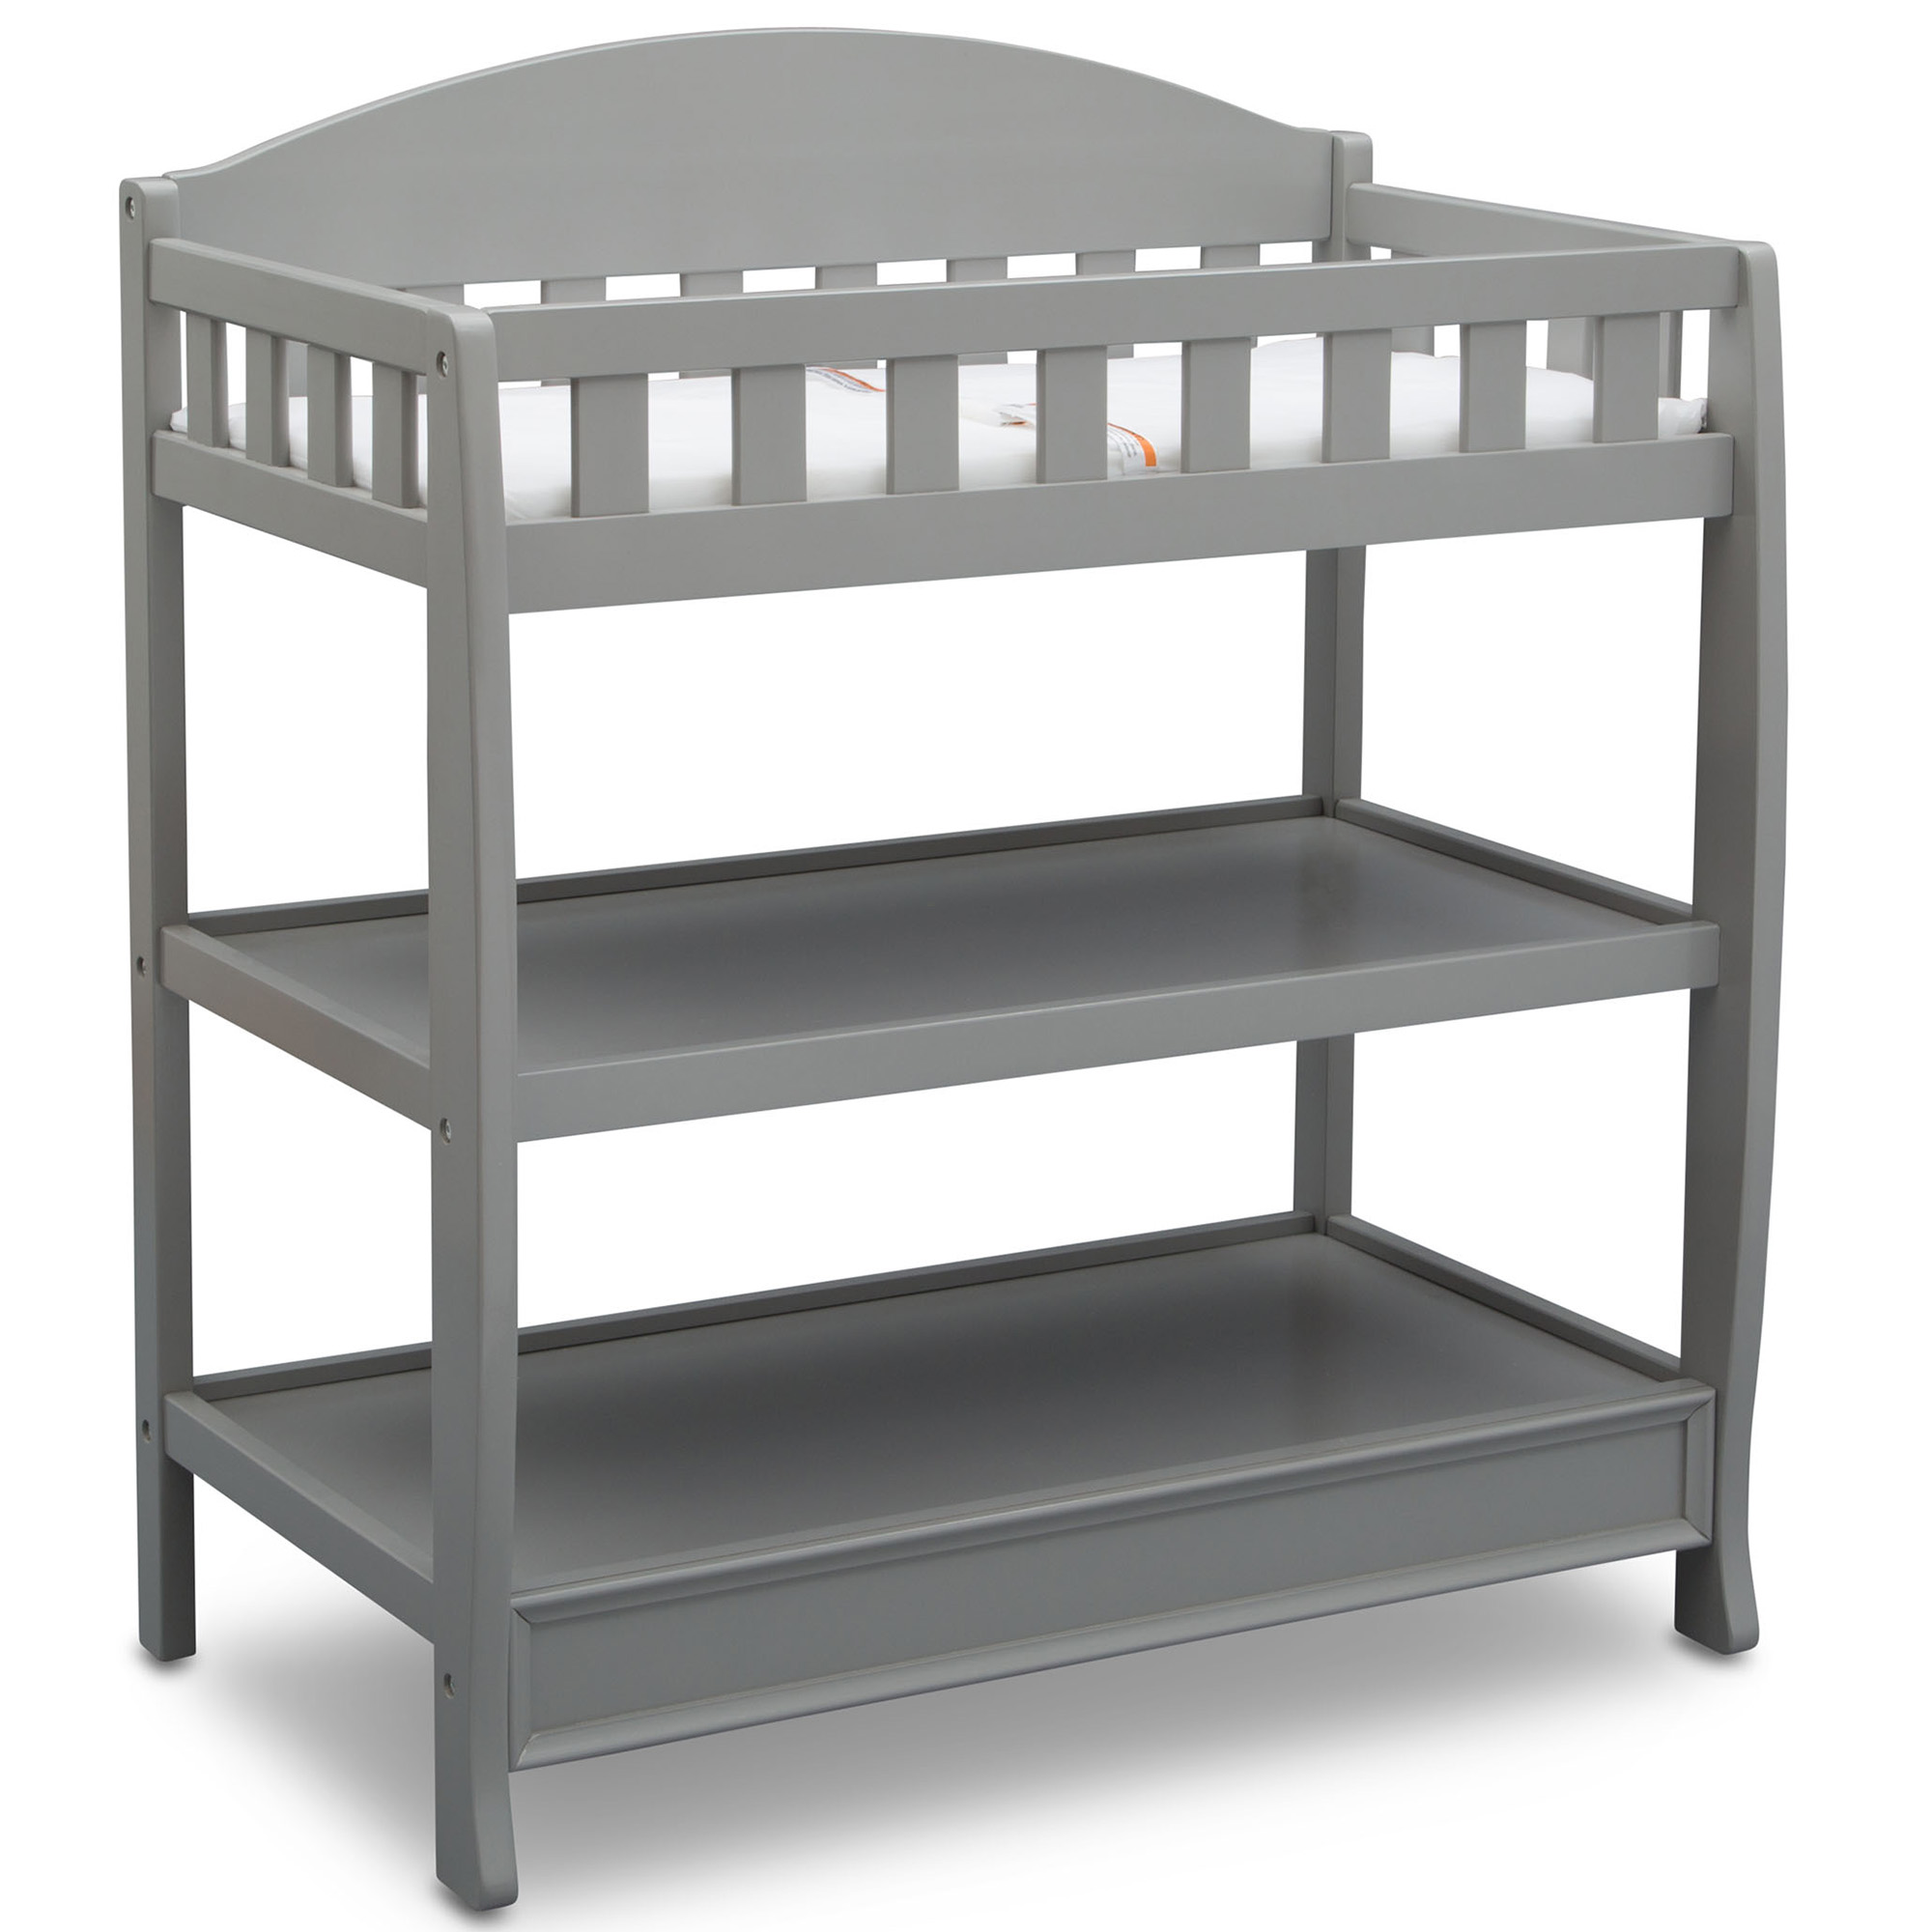 Delta Children Wilmington Changing Table with Pad, Grey - image 1 of 6